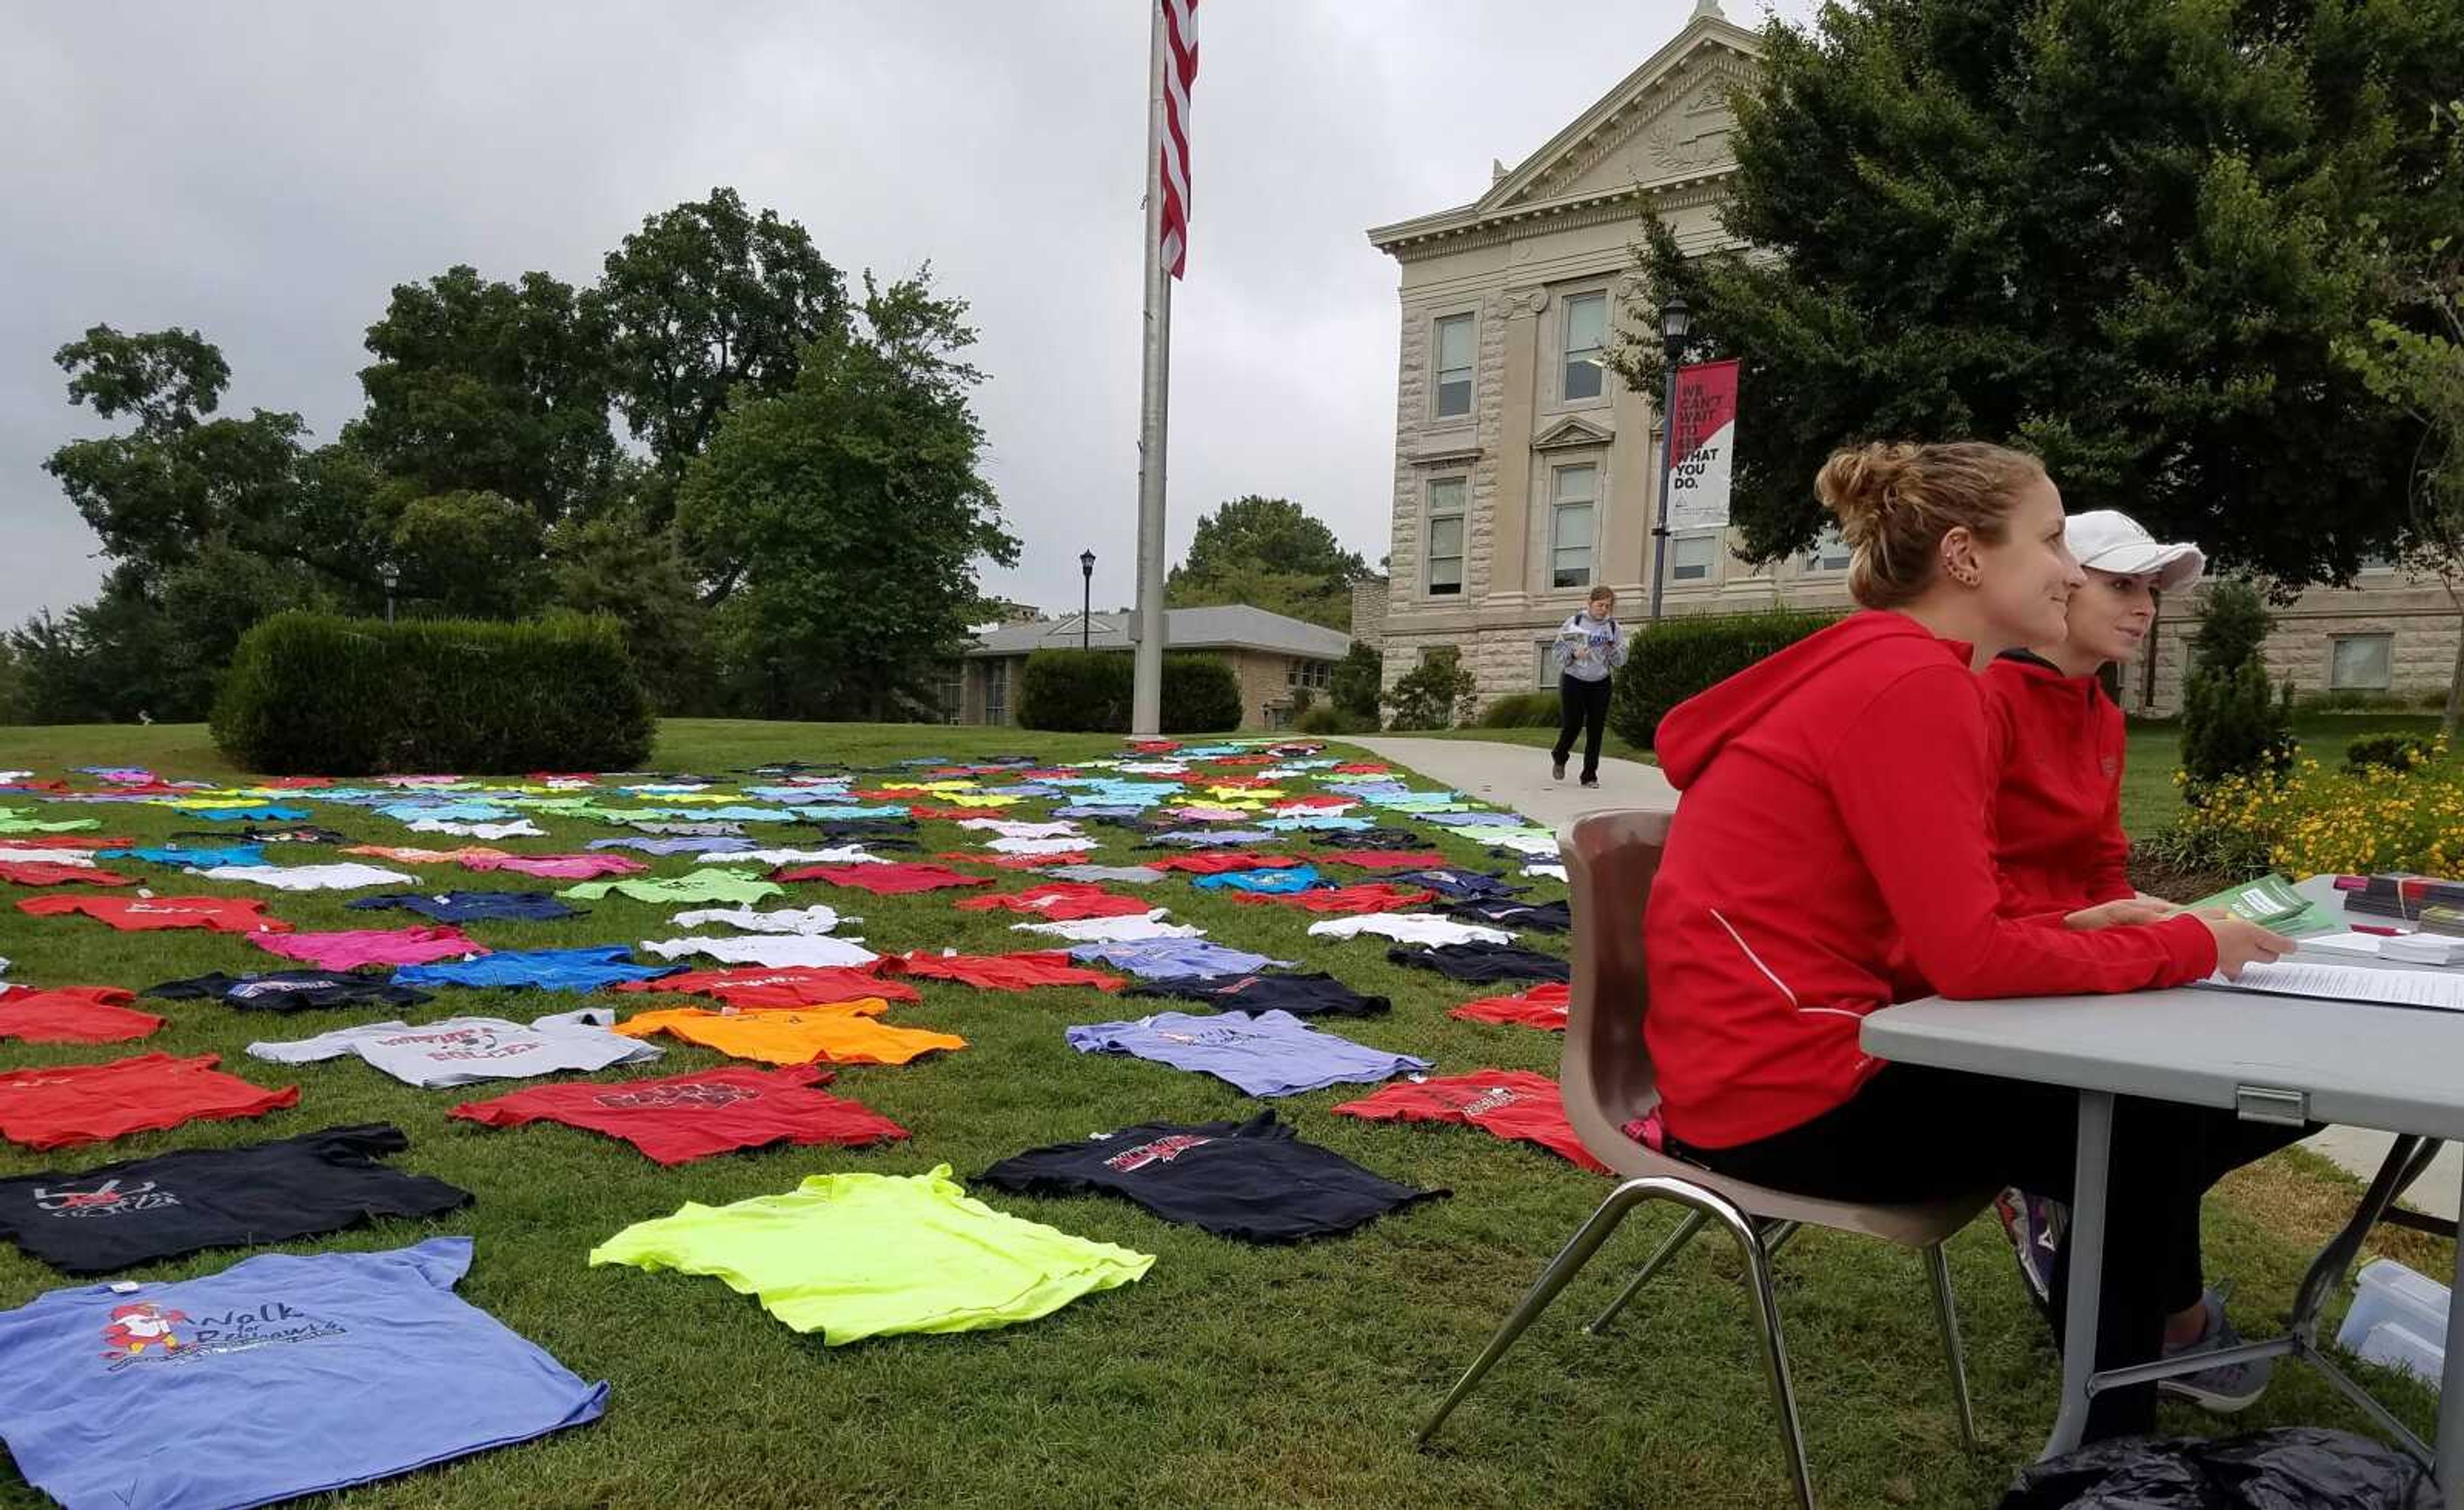 Student-Athlete Advising Committee represents suicide prevention with T-shirts